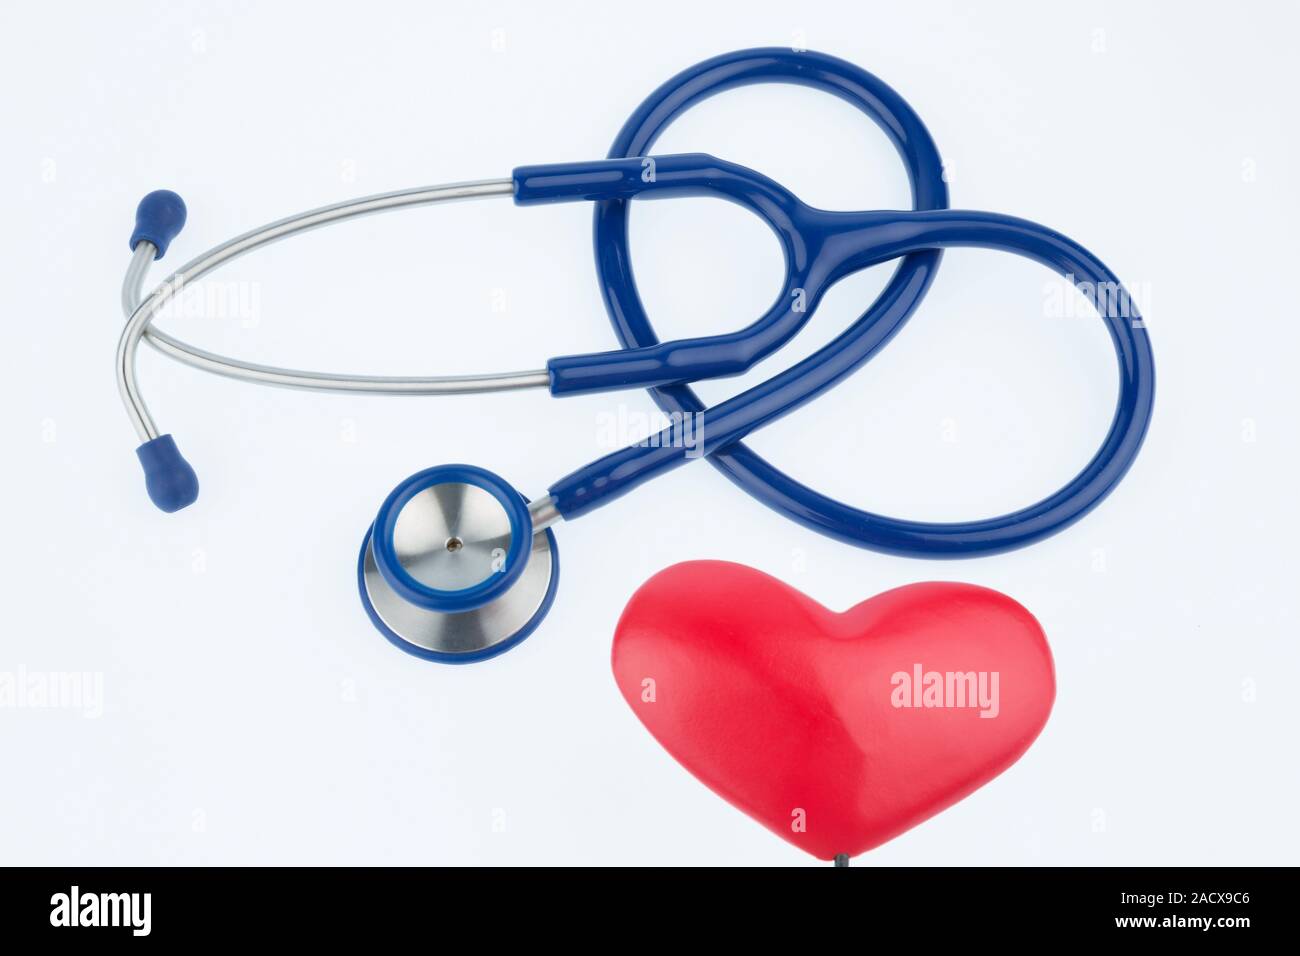 Stethoscope and a heart, Stock Photo